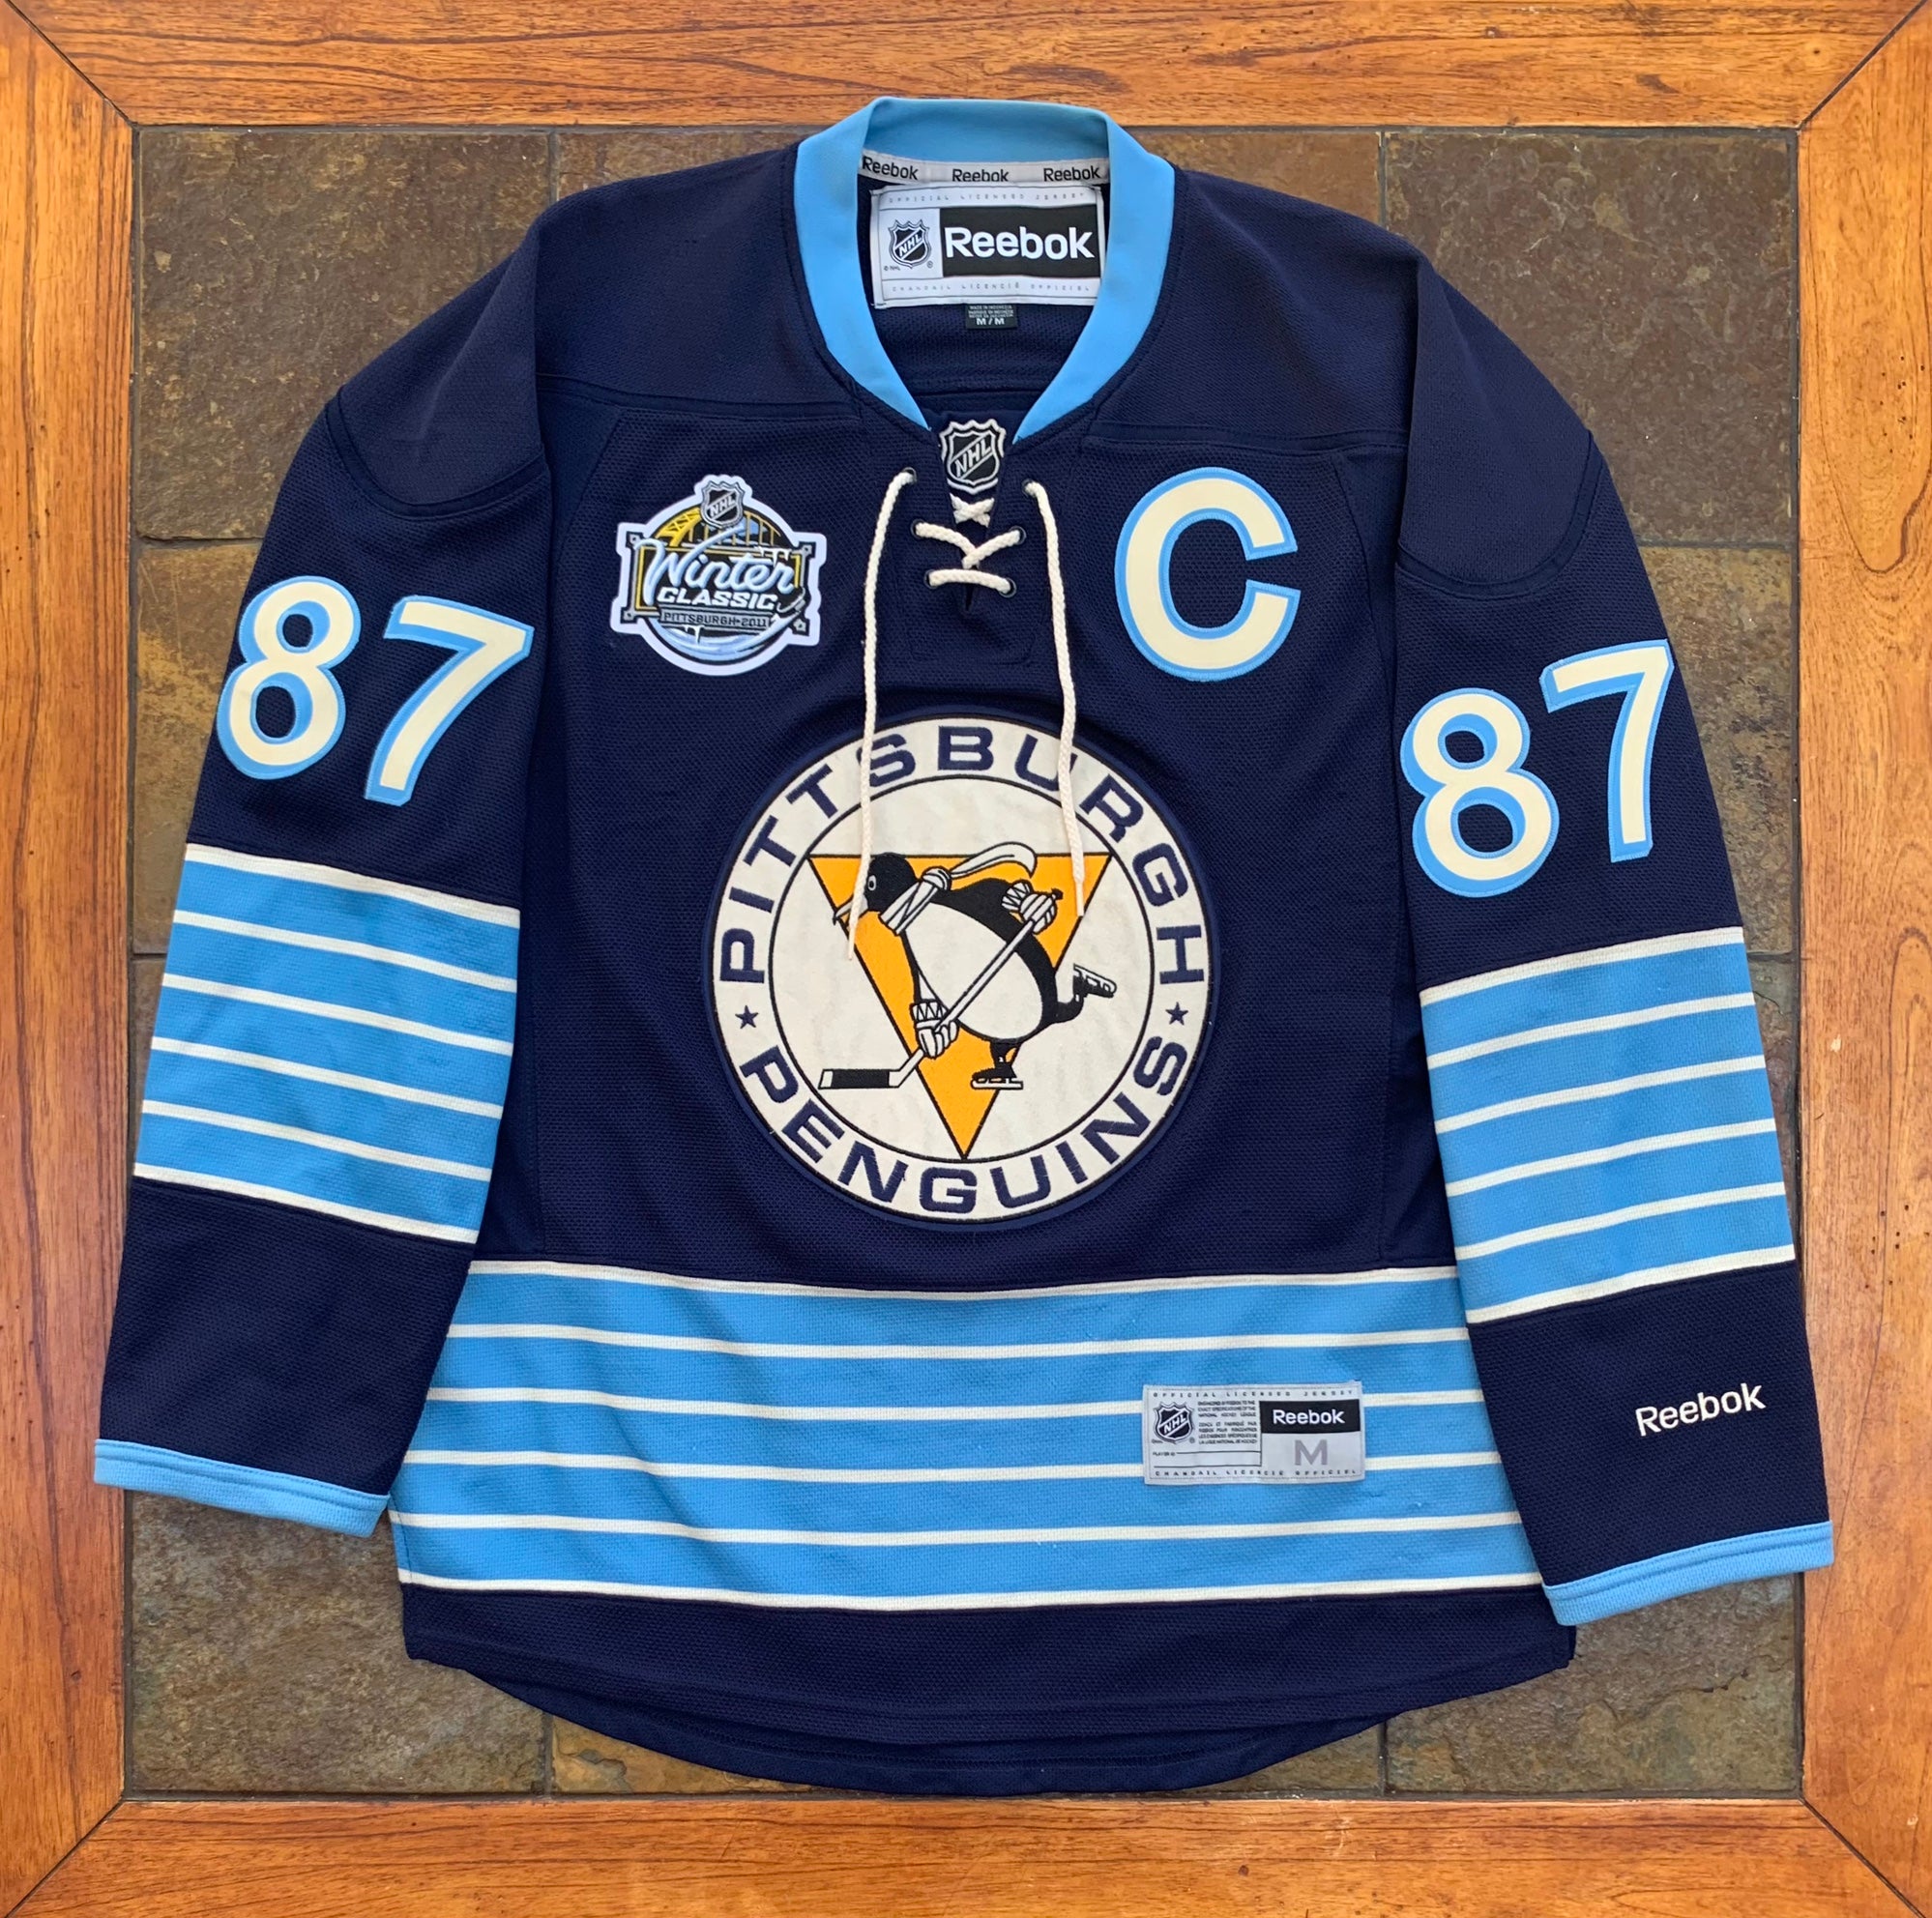 NWT-XL PITTSBURGH PENGUINS 2011 NHL WINTER CLASSIC LICENSED REEBOK HOCKEY  JERSEY